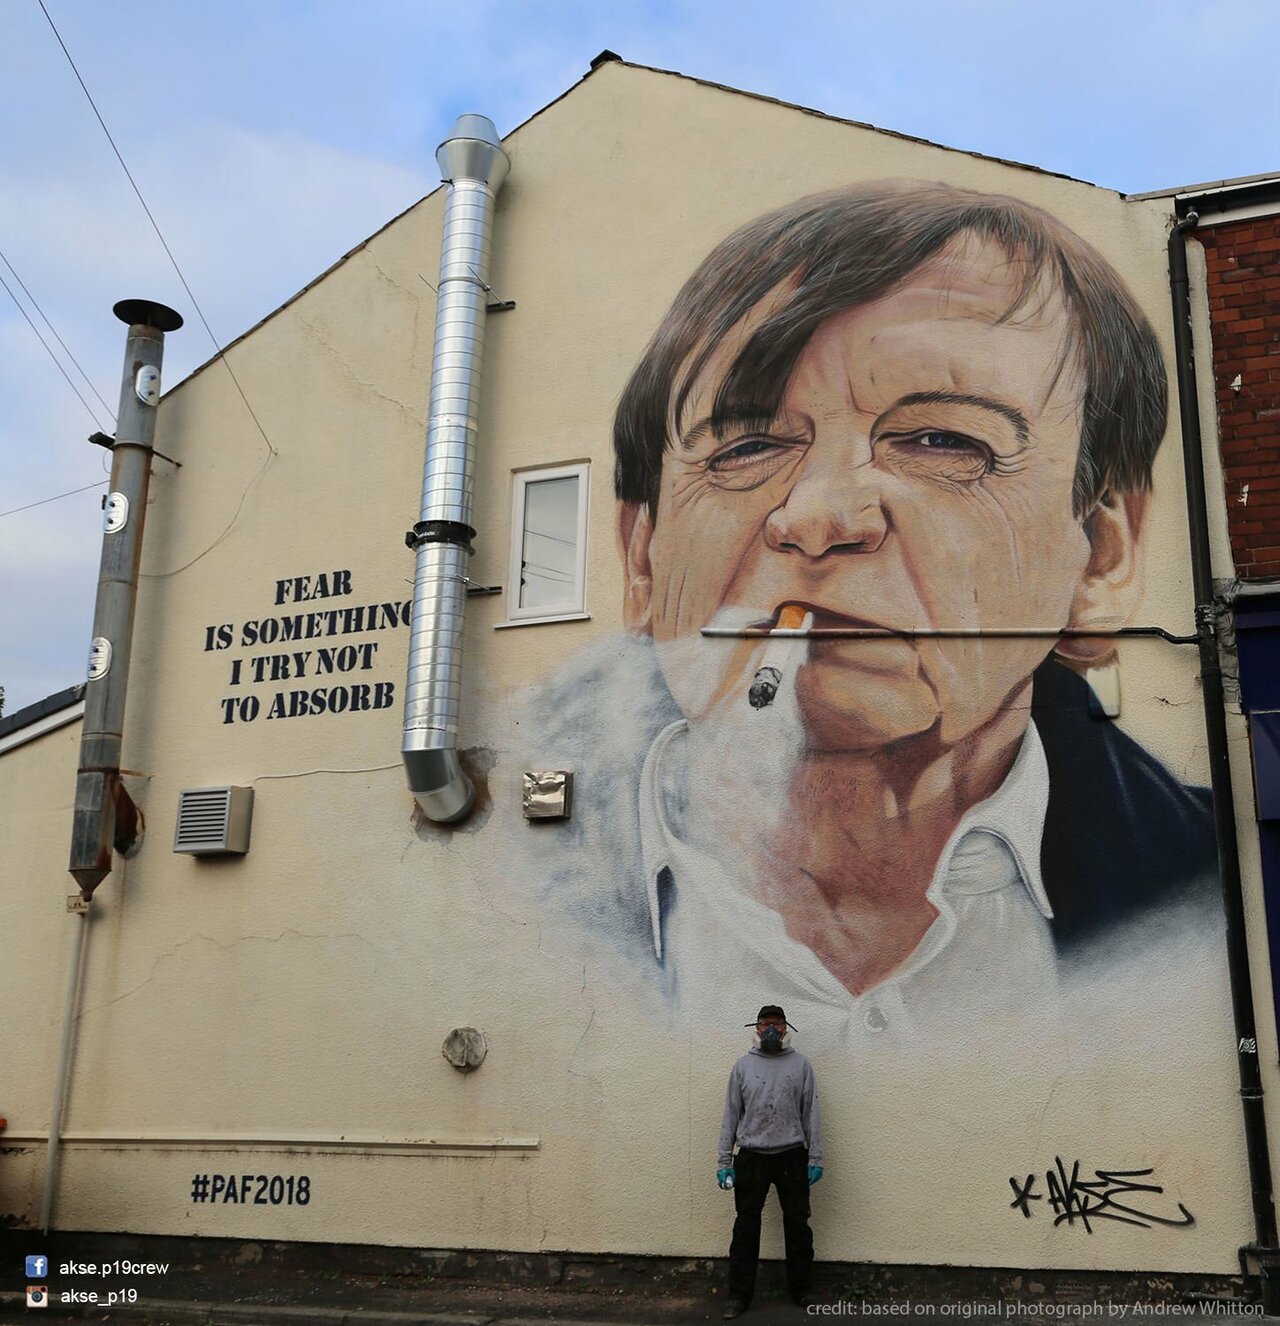 Portrait of the late Mark E Smith finally completed for @PwichArtsFest #akse #graffiti #art #streetart #prestwich #thefall #markesmith #mural #Manchester https://t.co/zRsyRmJ3OF